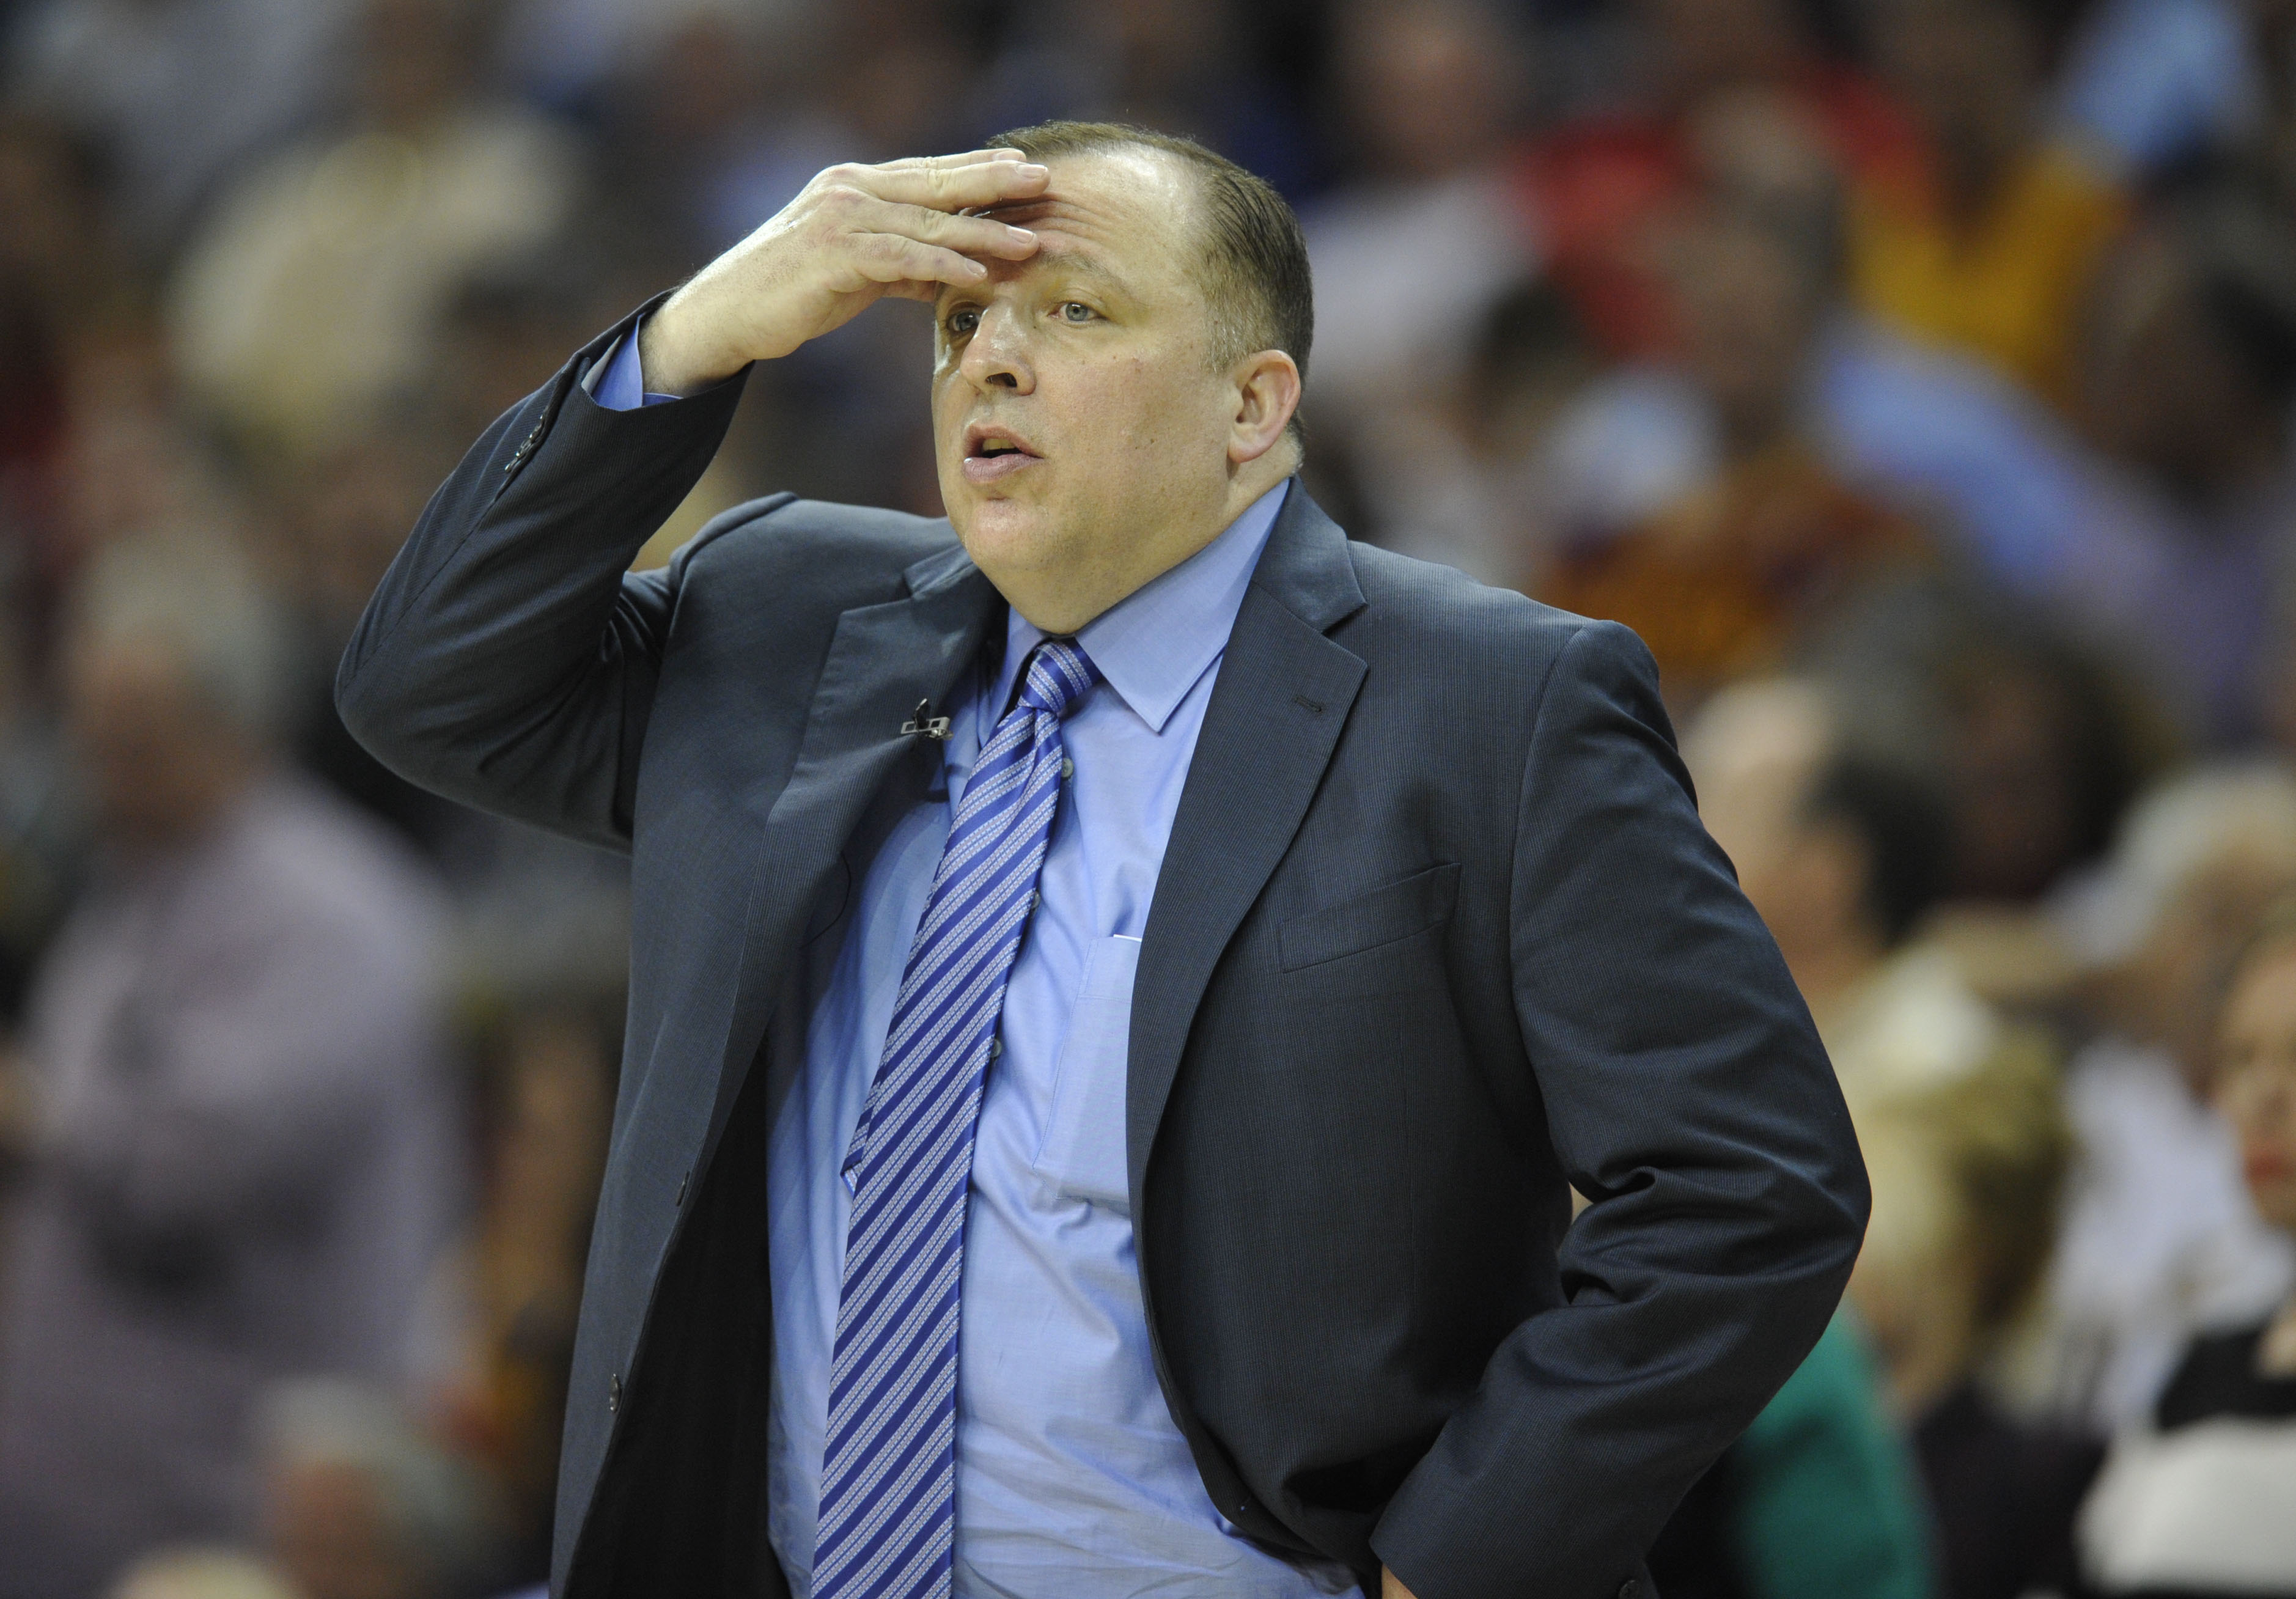 May 12, 2015; Cleveland, OH, USA; Chicago Bulls head coach Tom Thibodeau reacts in the fourth quarter against the Cleveland Cavaliers in game five of the second round of the NBA Playoffs at Quicken Loans Arena. Mandatory Credit: David Richard-USA TODAY Sports